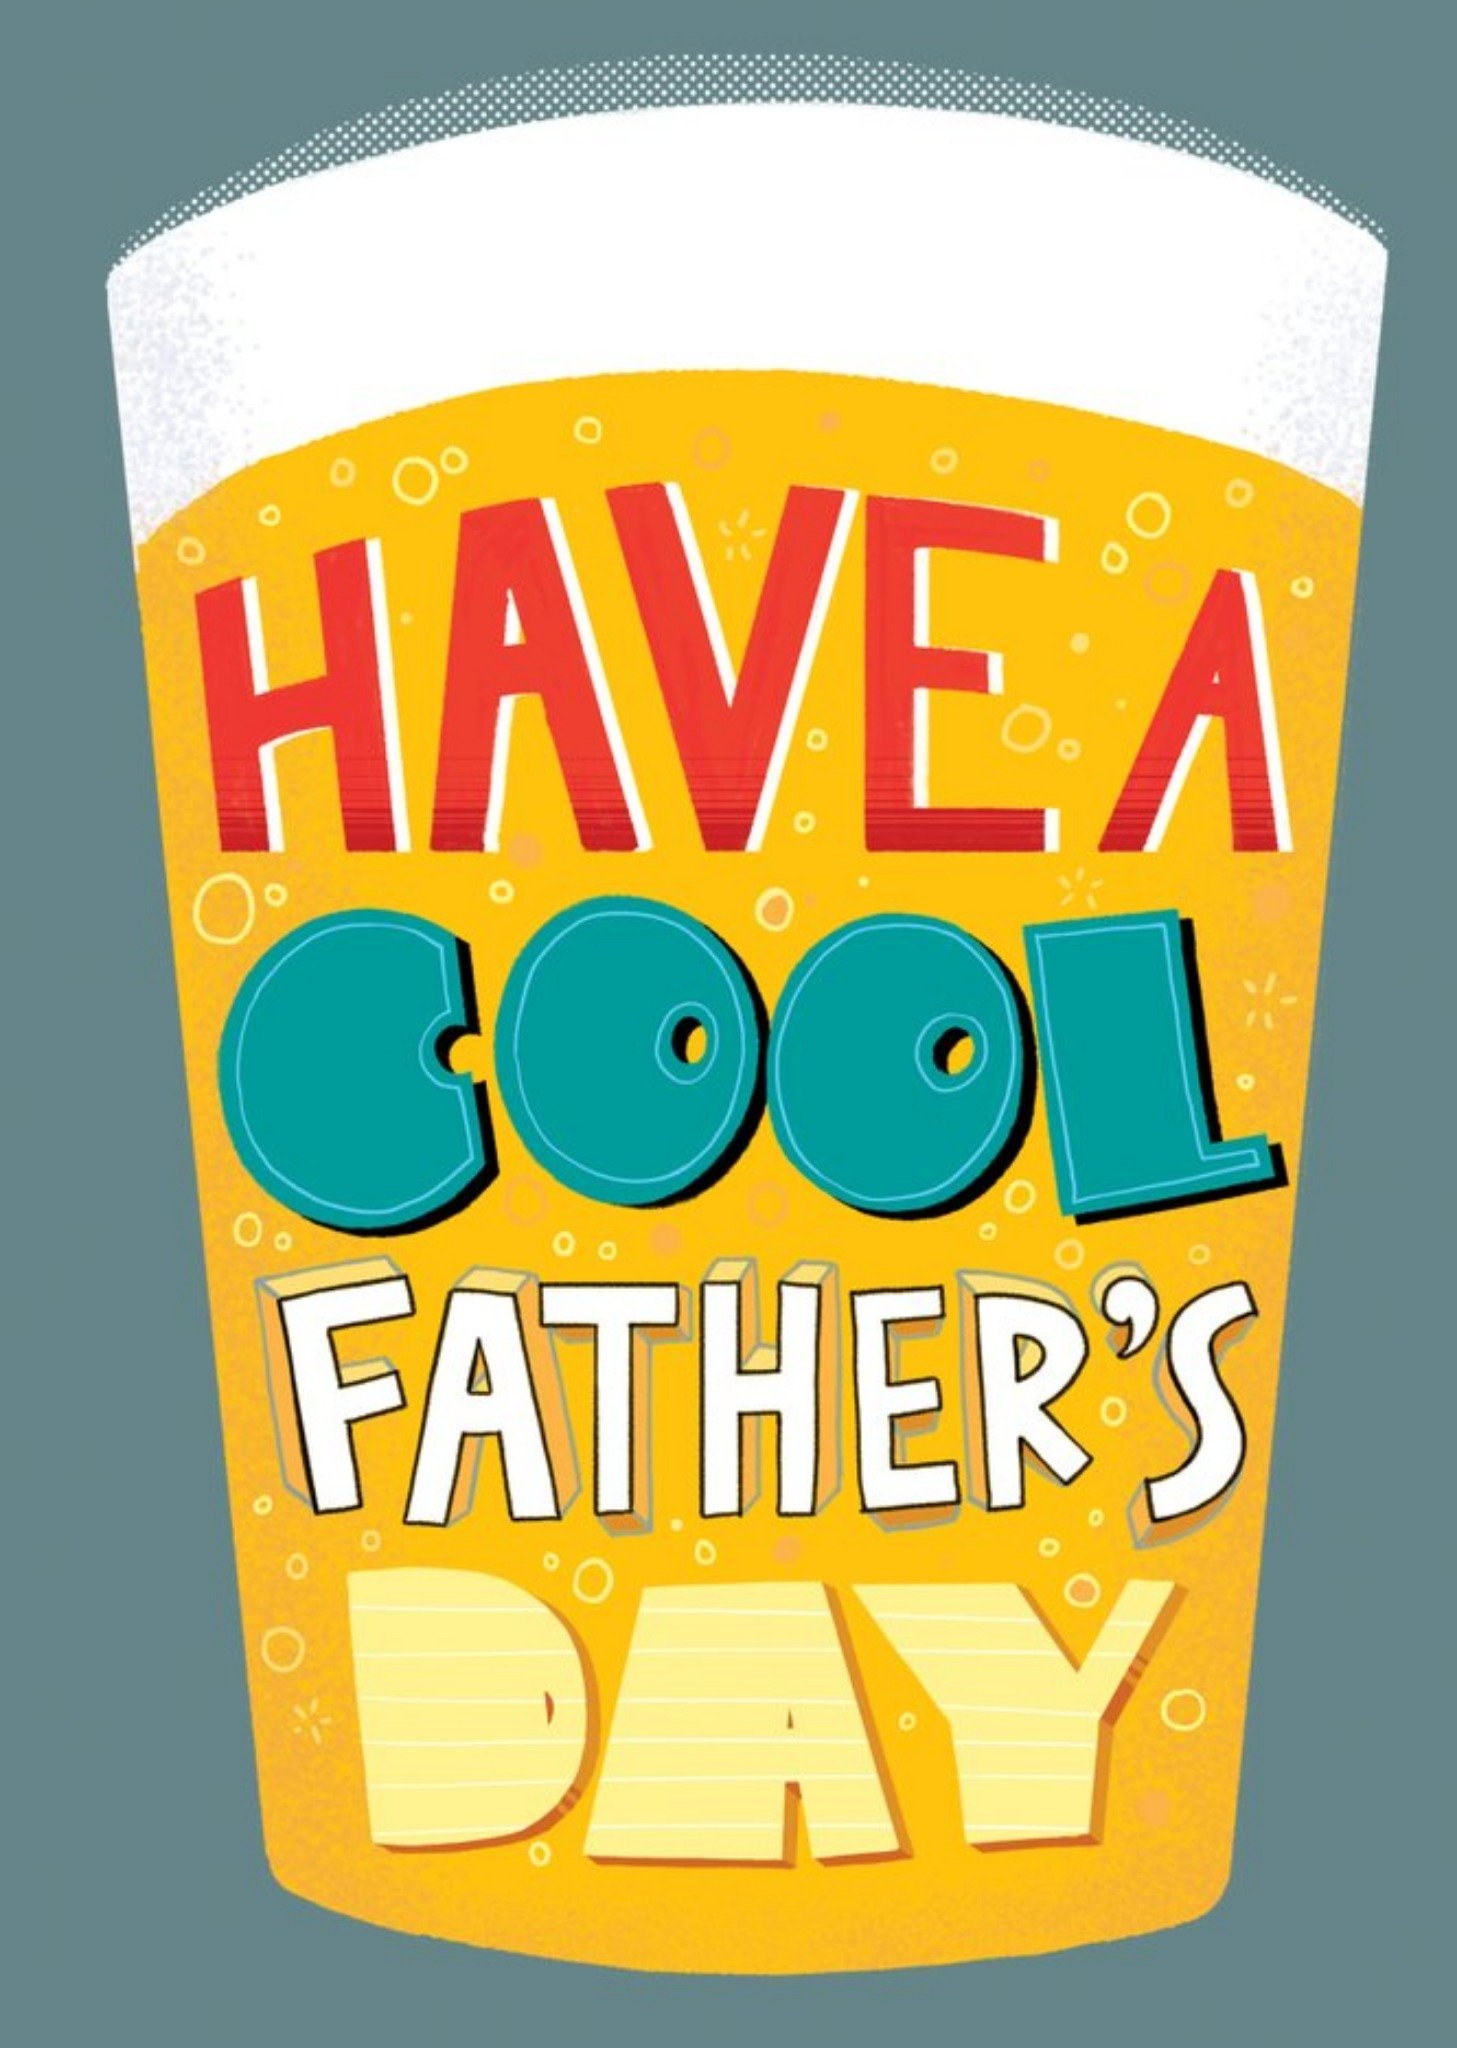 Moonpig Illustration Of A Pint Of Beer With Funky Typography Cool Father's Day Card, Large